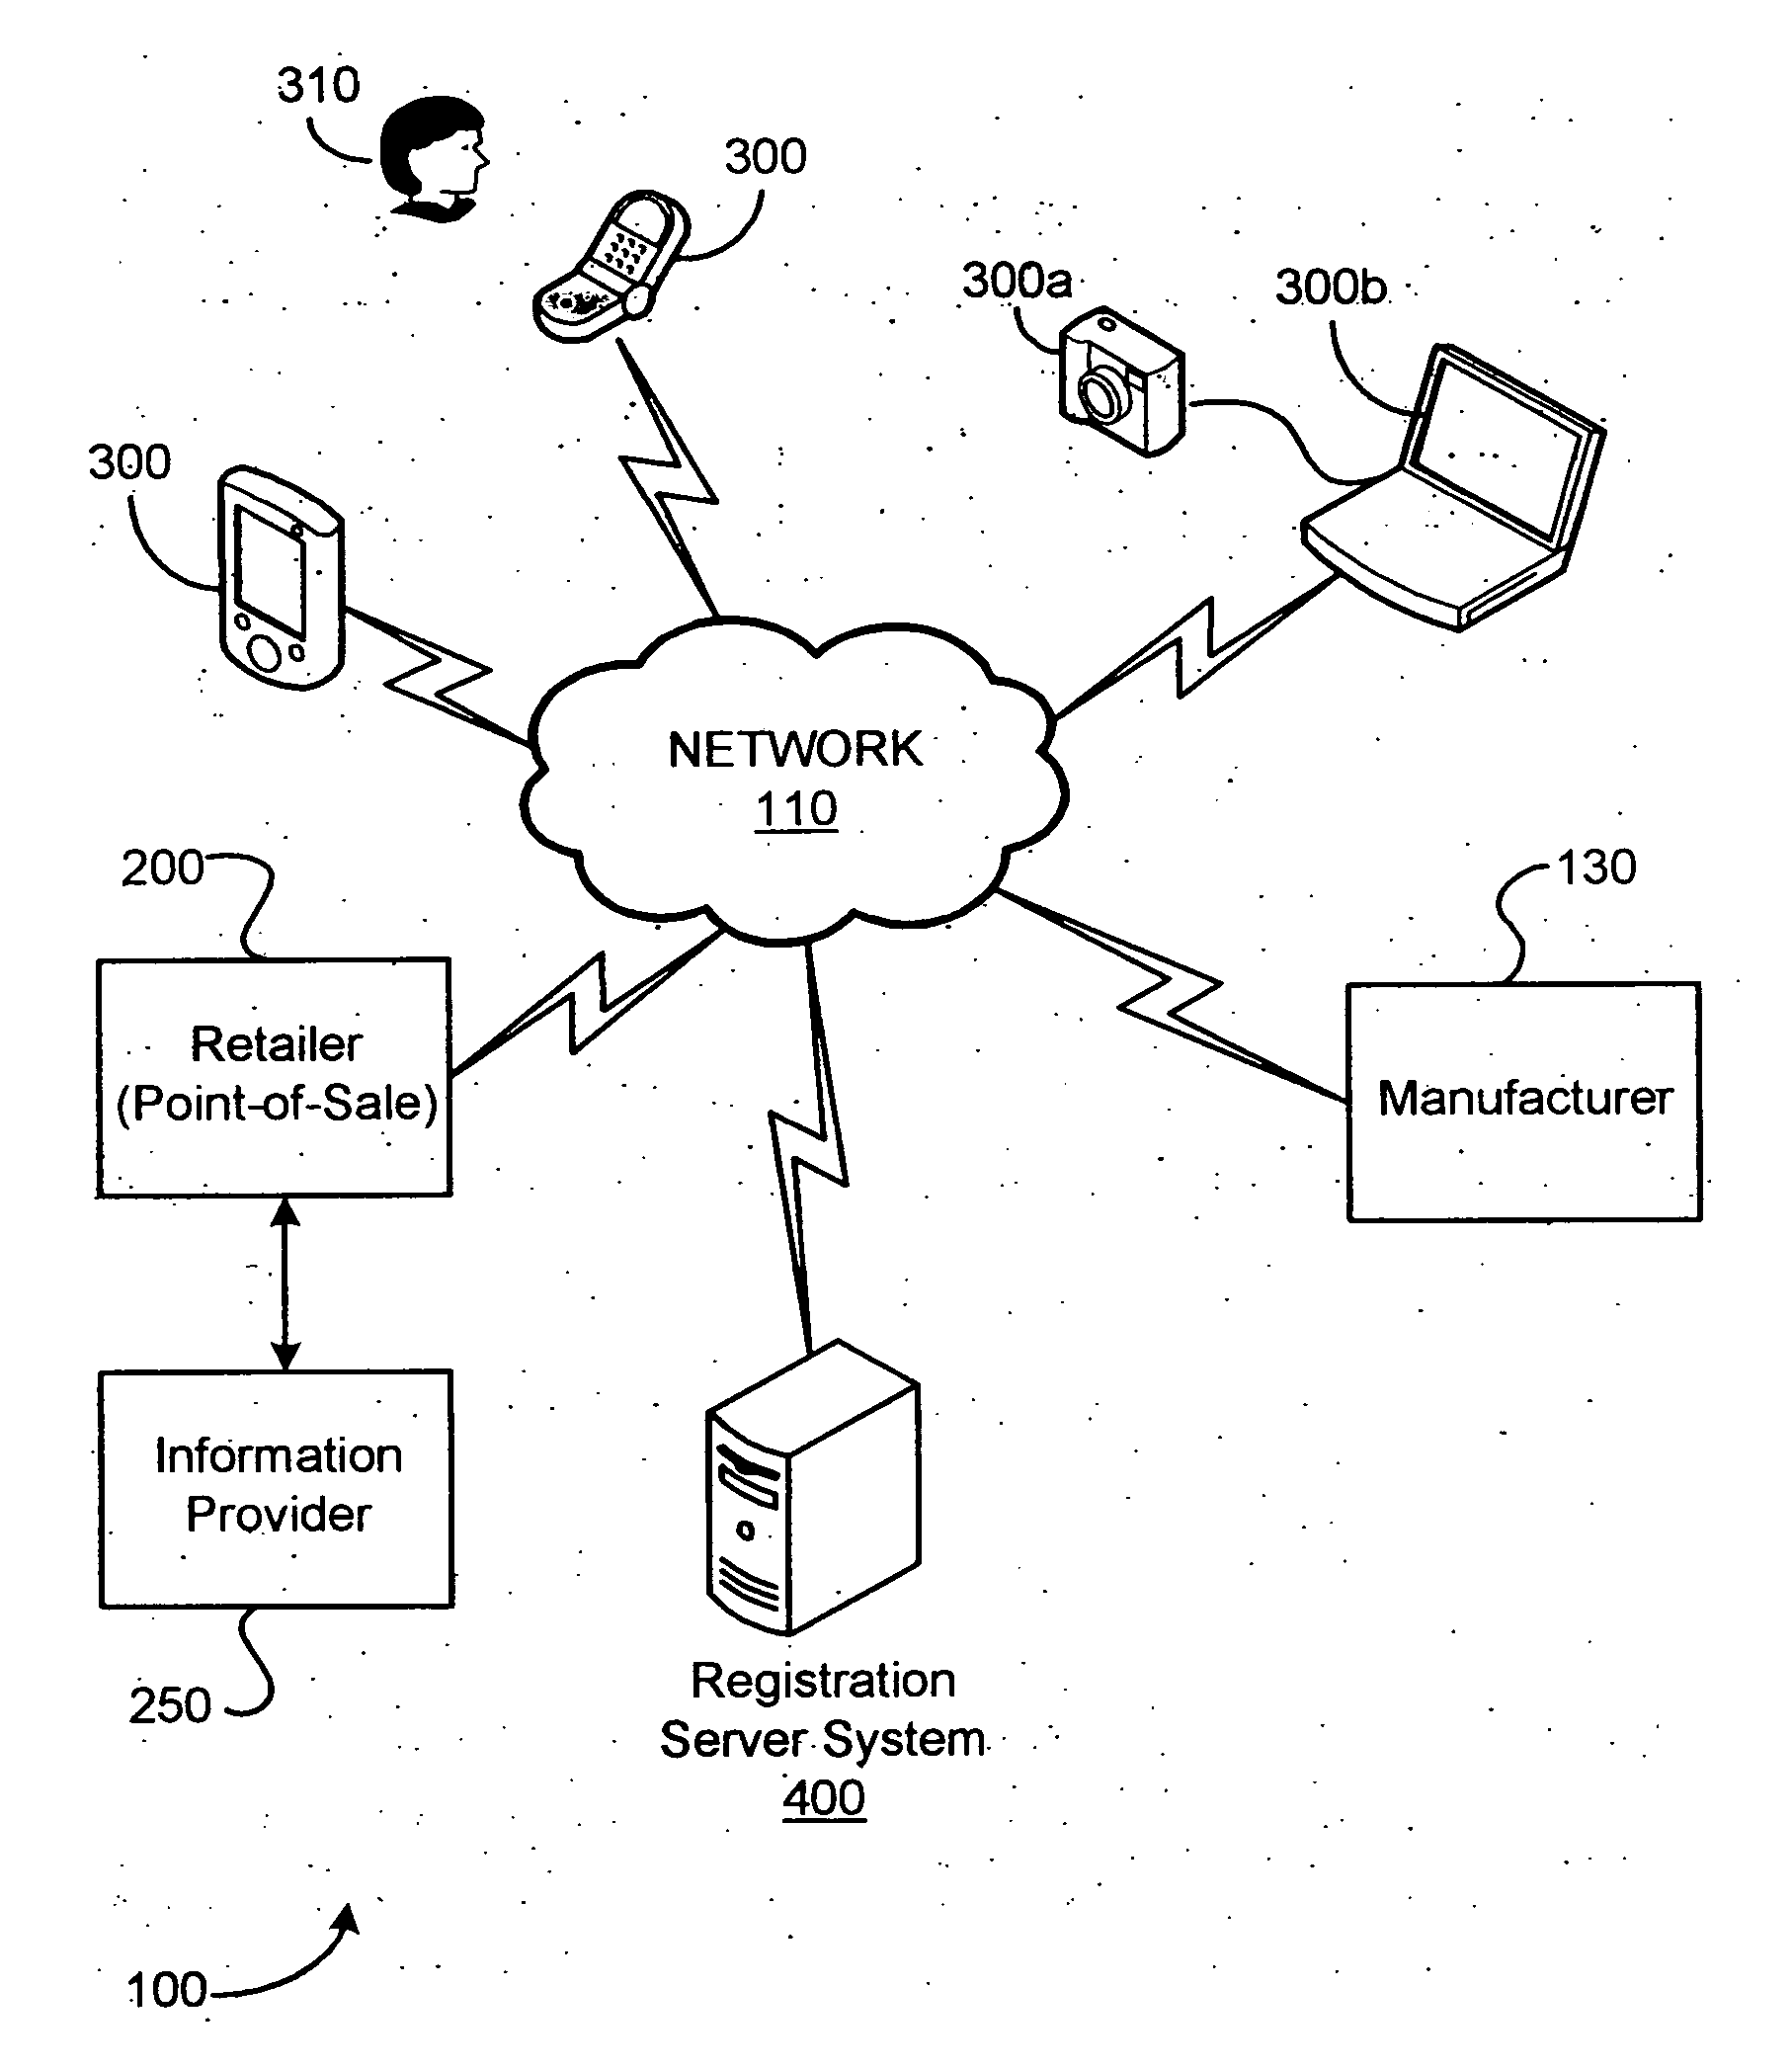 System and method for registration of an electronic device